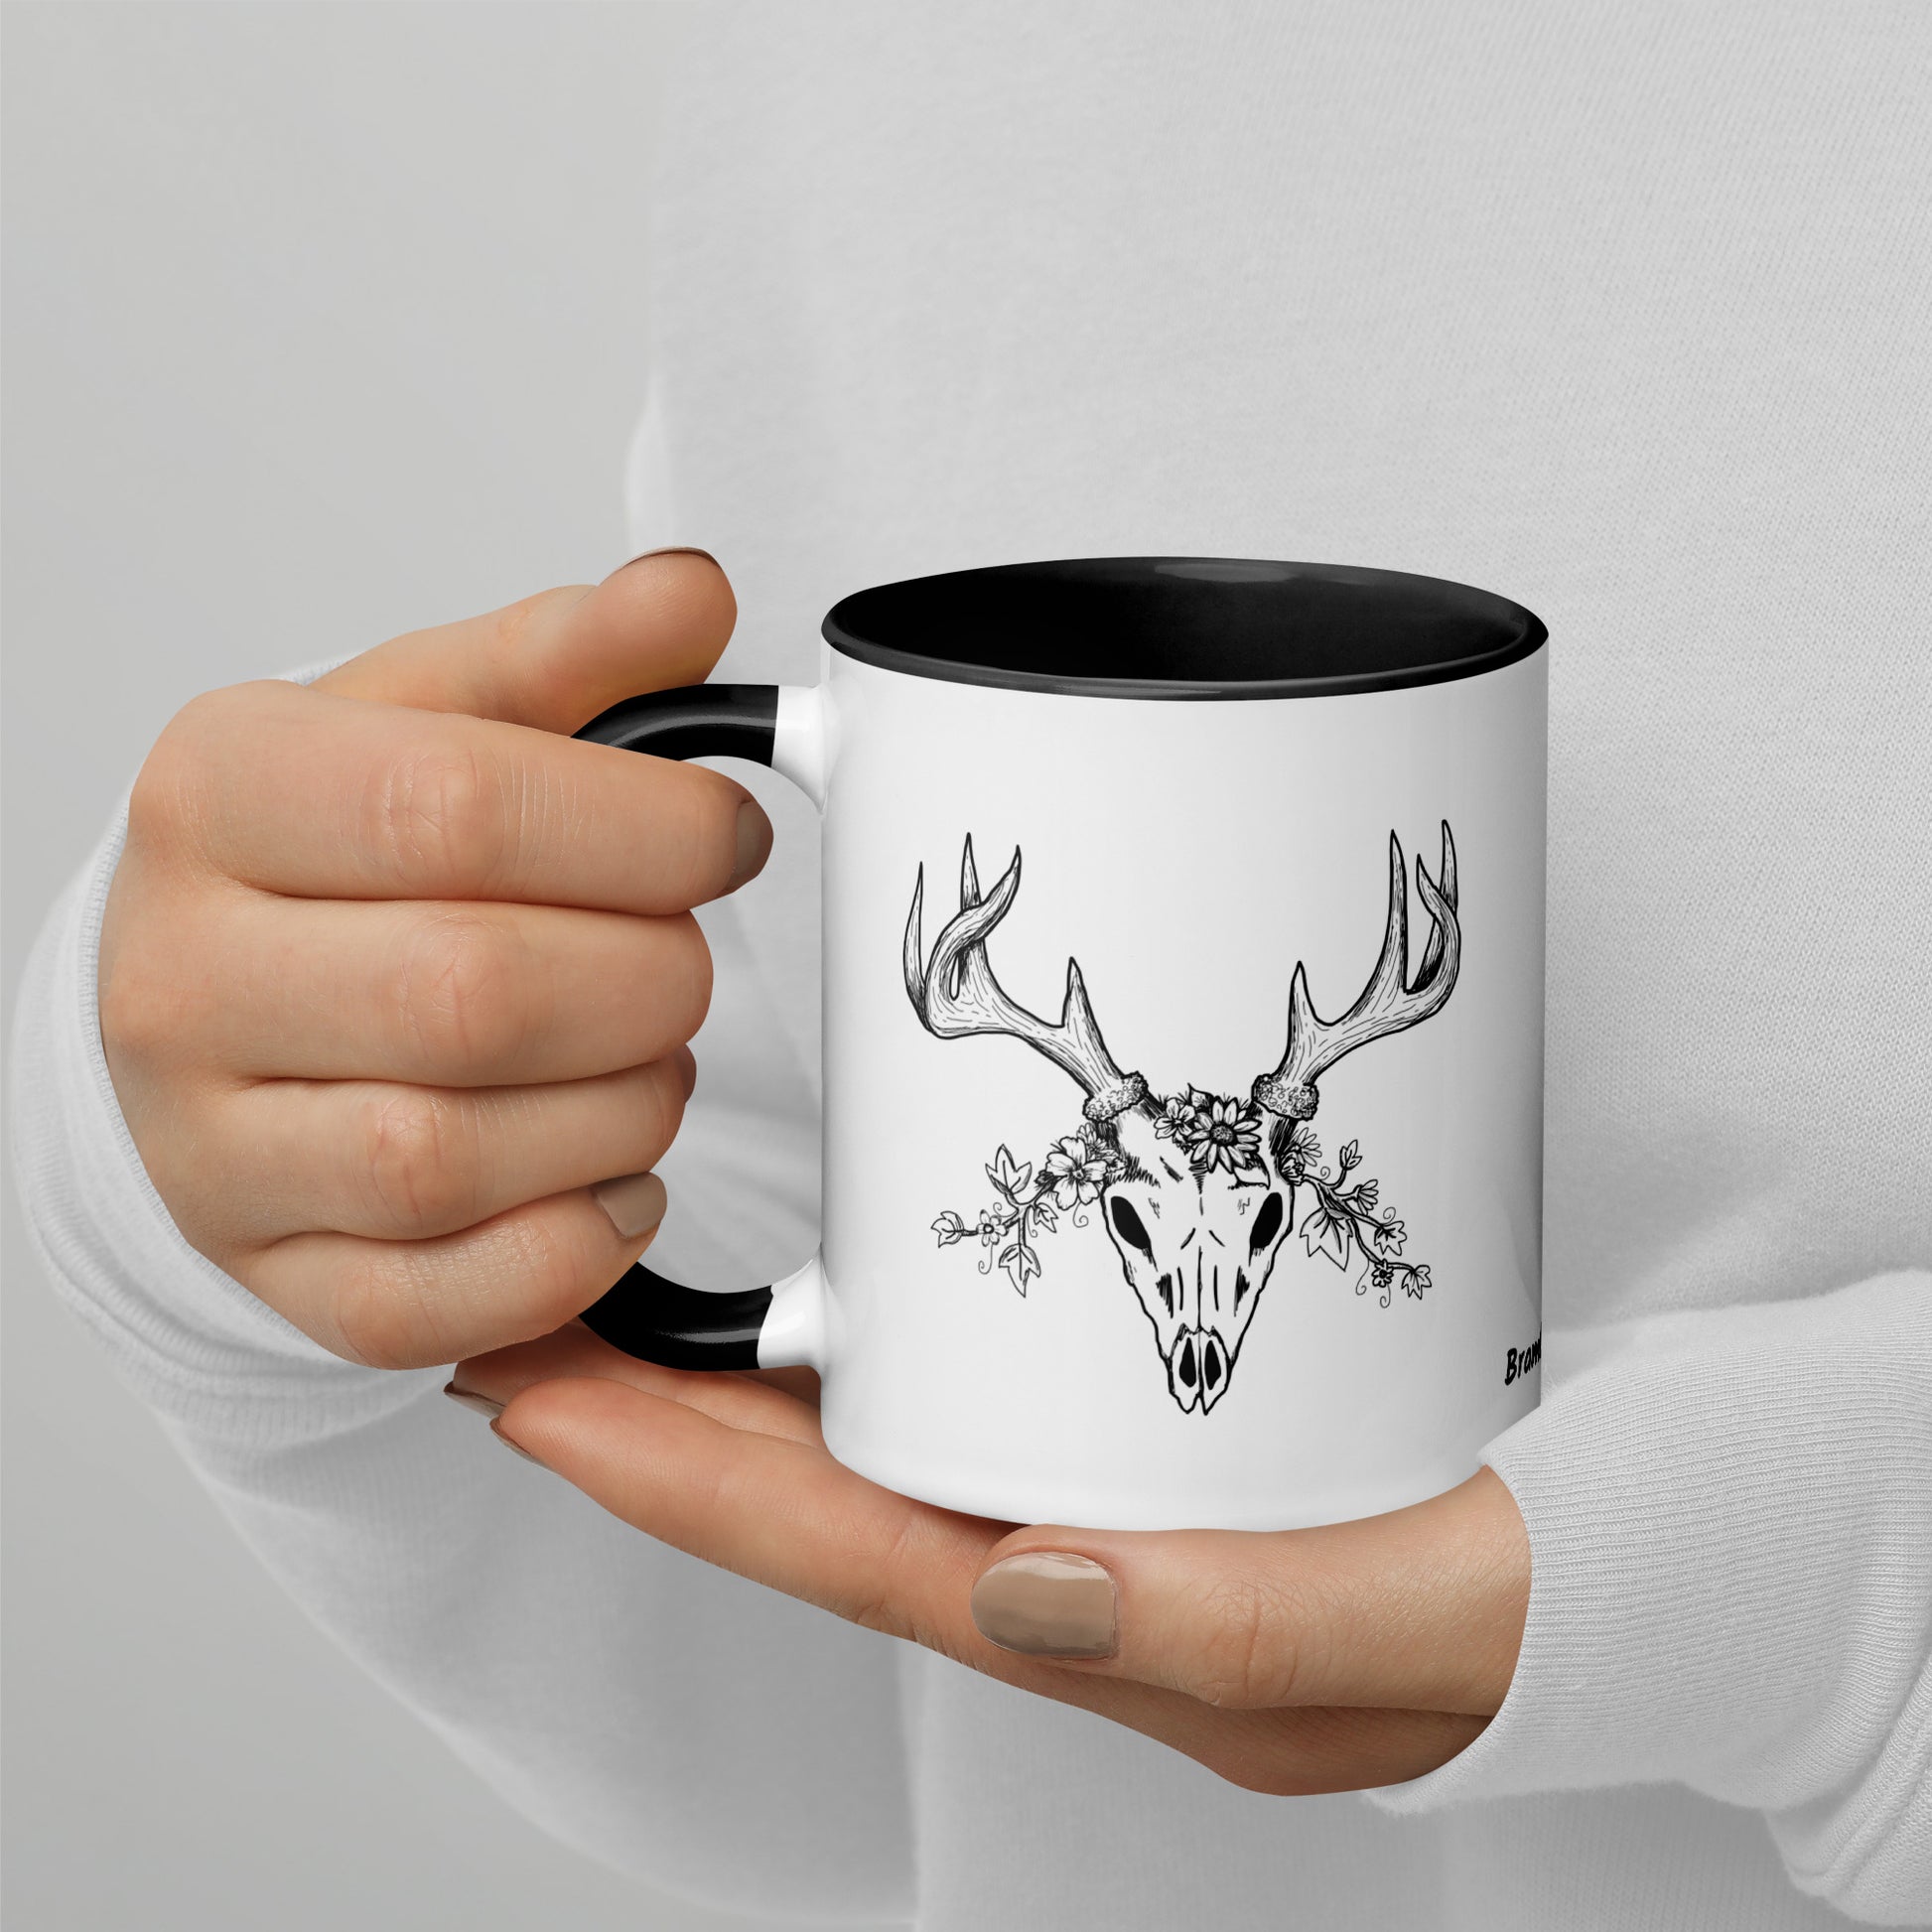 11 ounce ceramic mug with hand illustrated deer skull wreathed in flowers. Double-sided design. Mug has black rim, handle, and inside. Shown in model's hand.